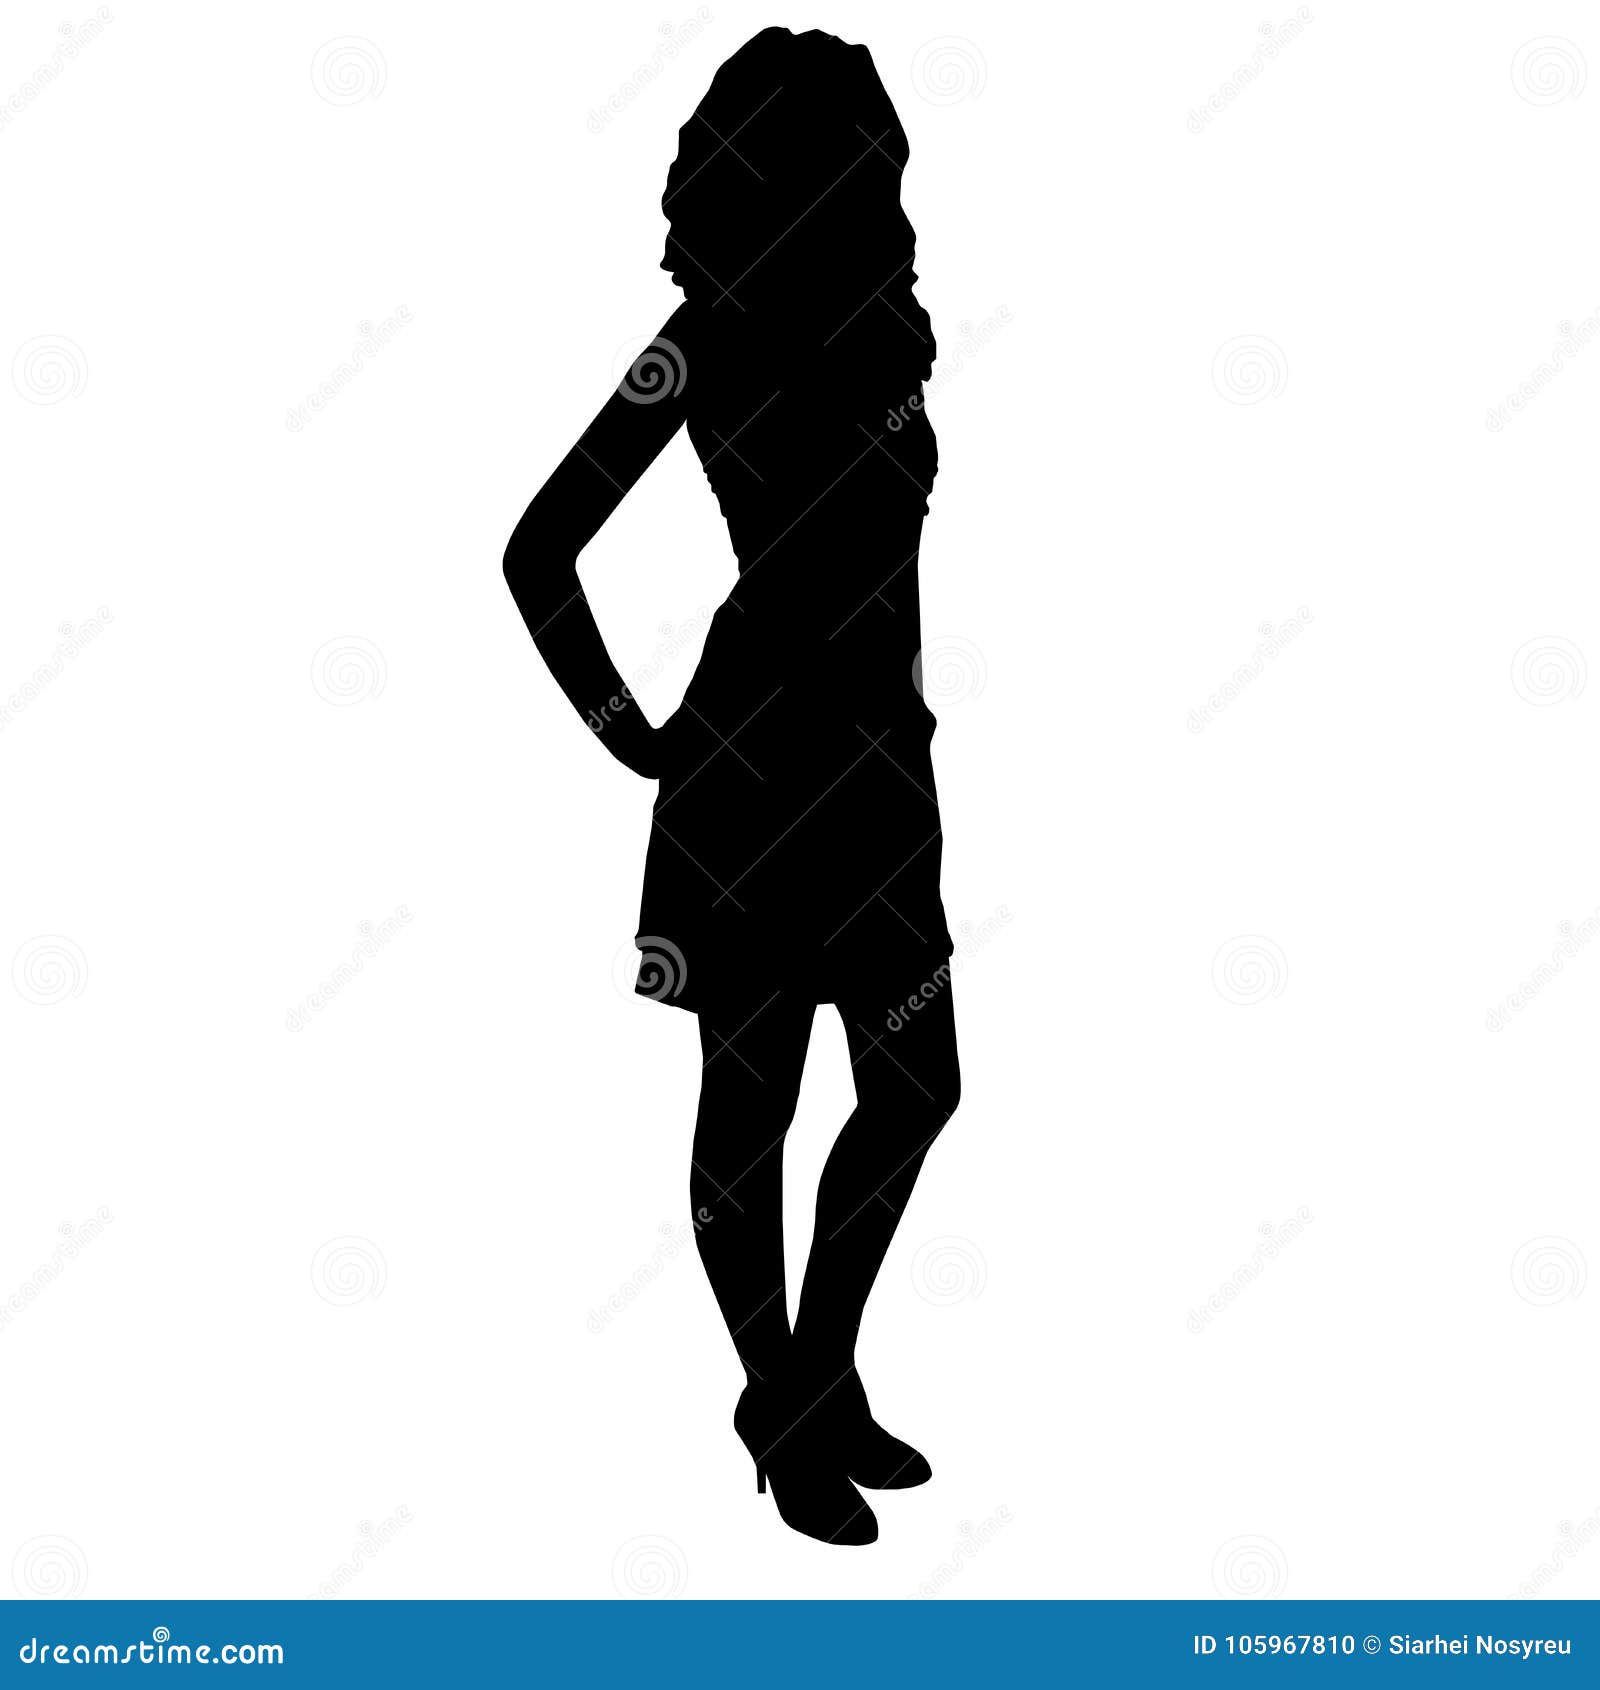 silhouette of slim beautiful woman girl with long legs clothed in cocktail dress and high heels, standing with hands on her hips